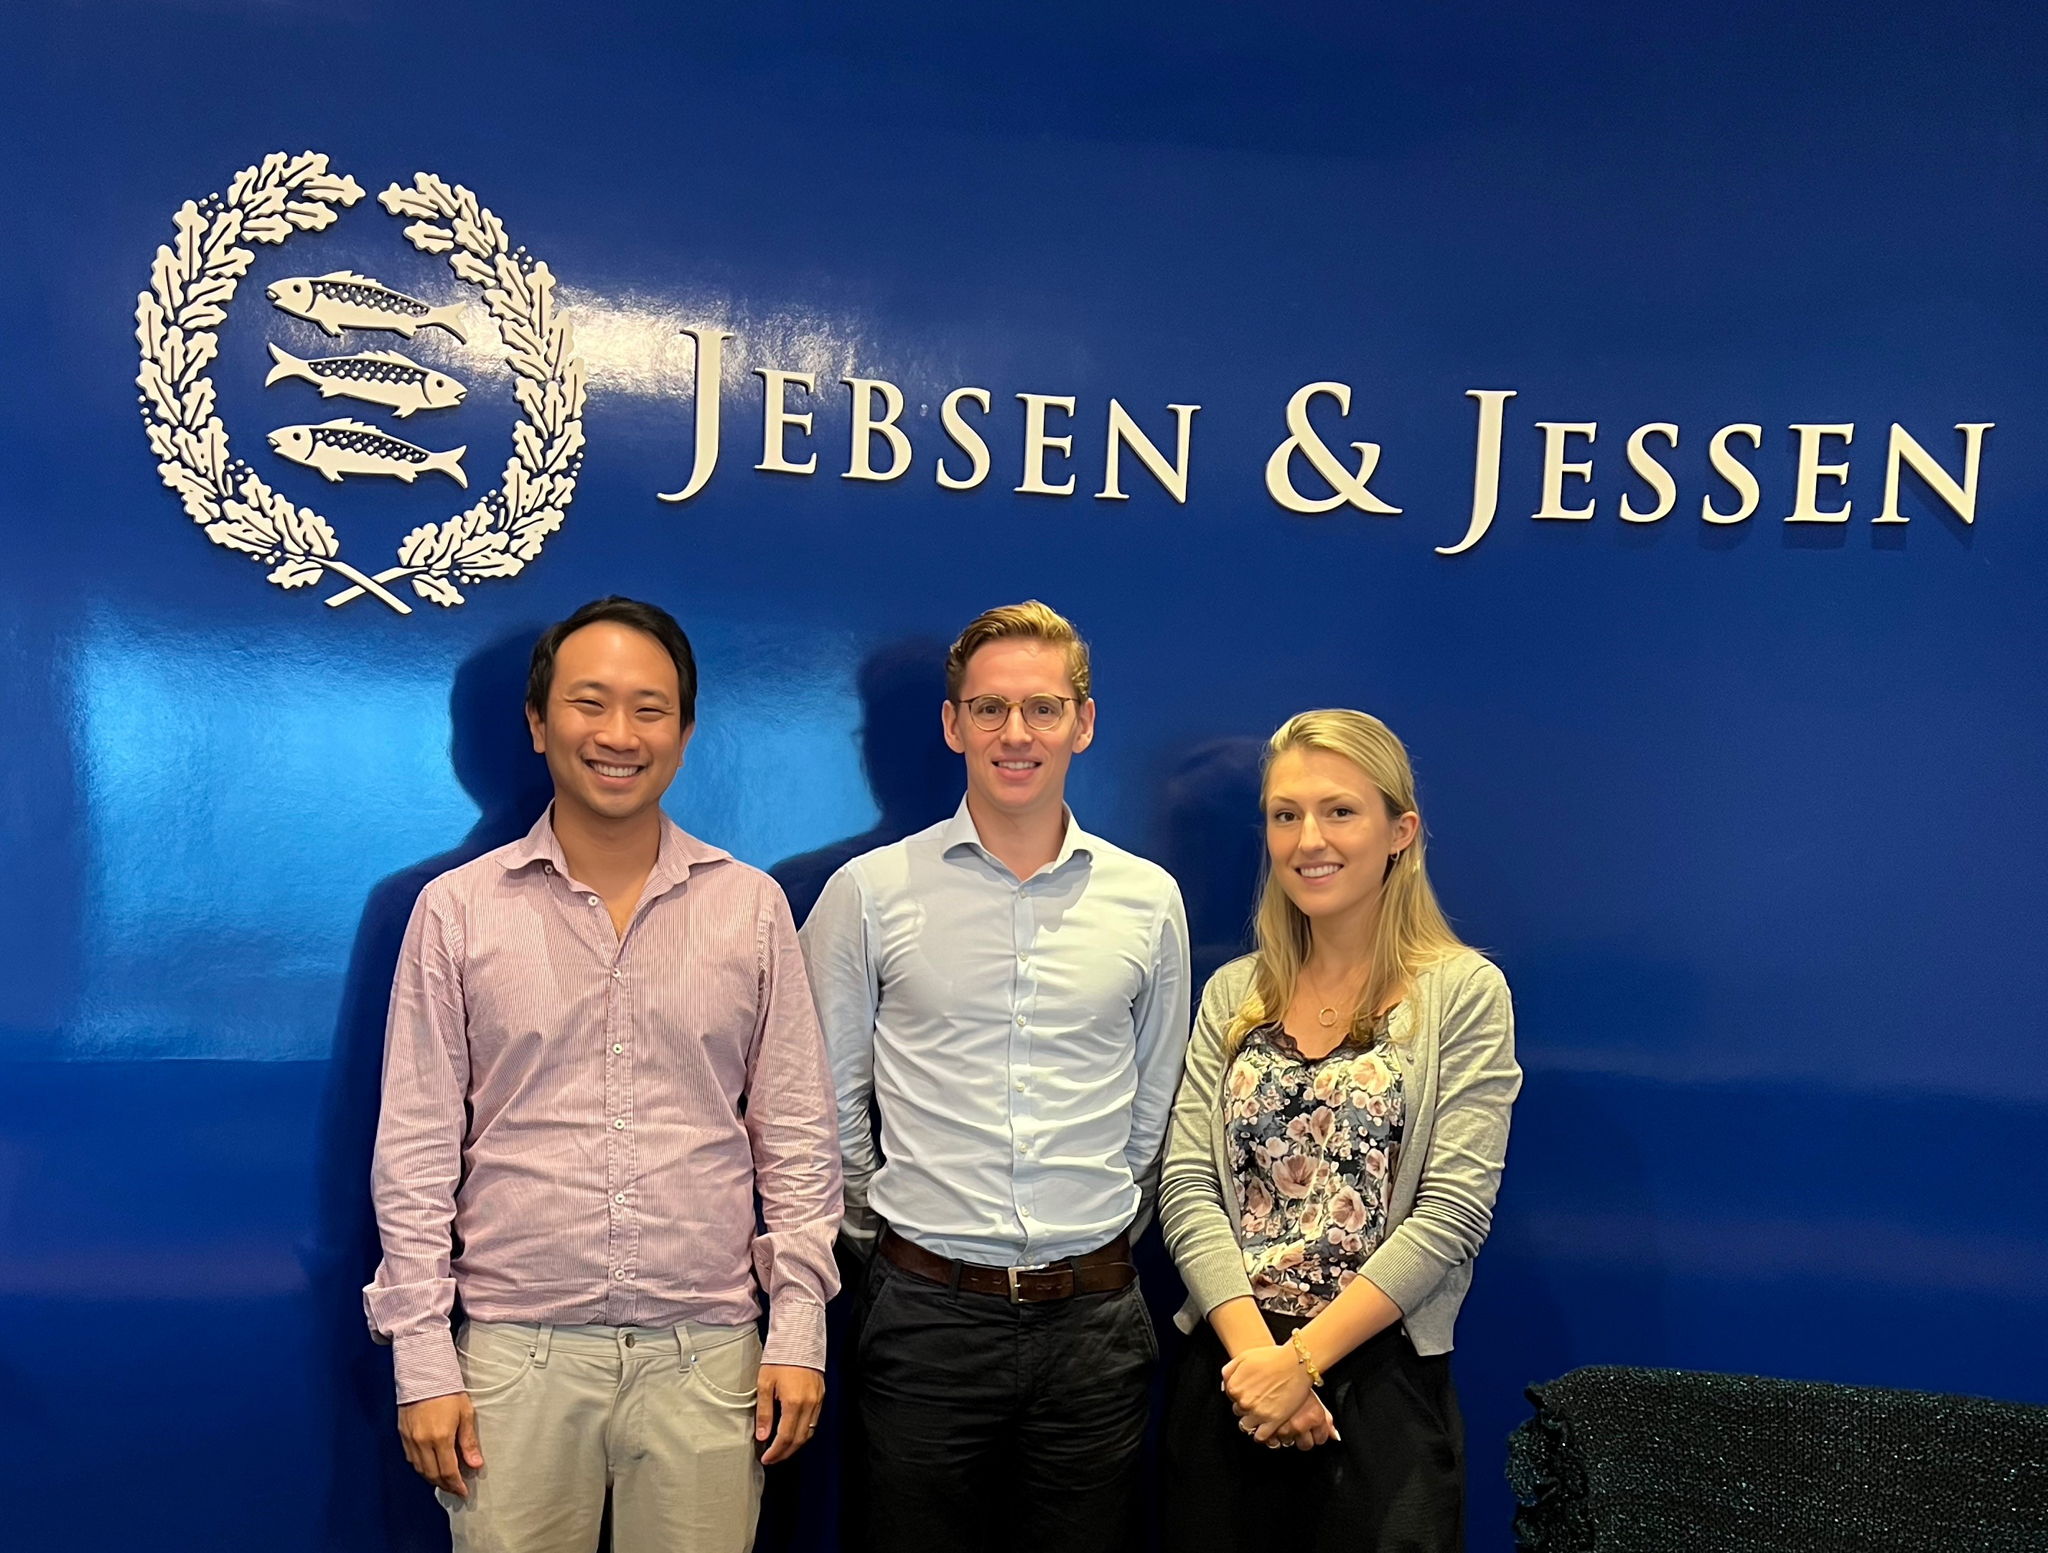 From left to right: Lucien Ong, M&A Director, Henry Steikowsky, intern, Nina Jessen, Corporate Communications